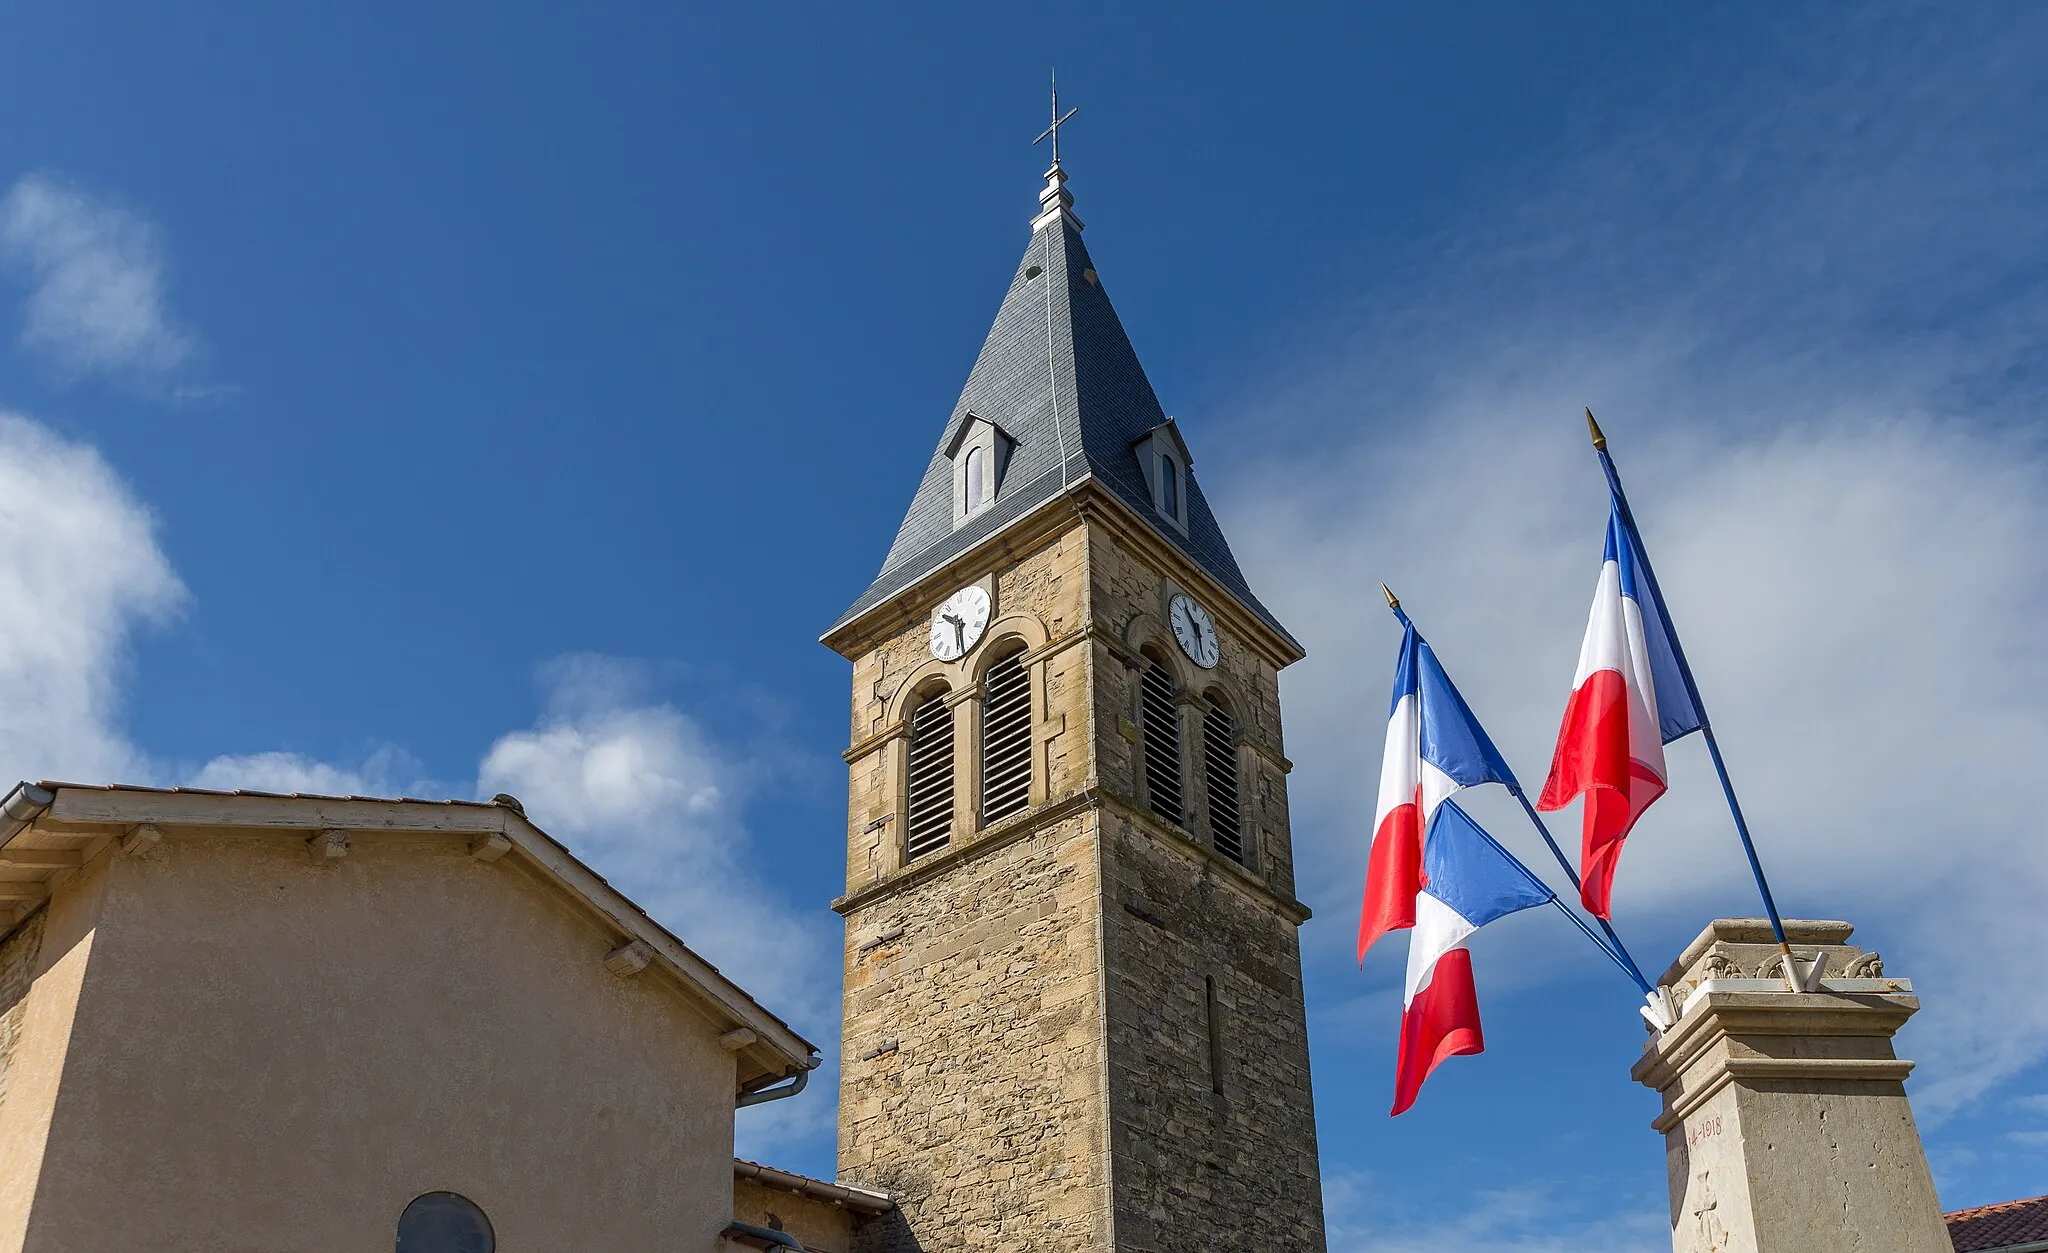 Photo showing: Meyrié, Isère. The bell tower of the Saint-Clair church and the flags of the war memorial.